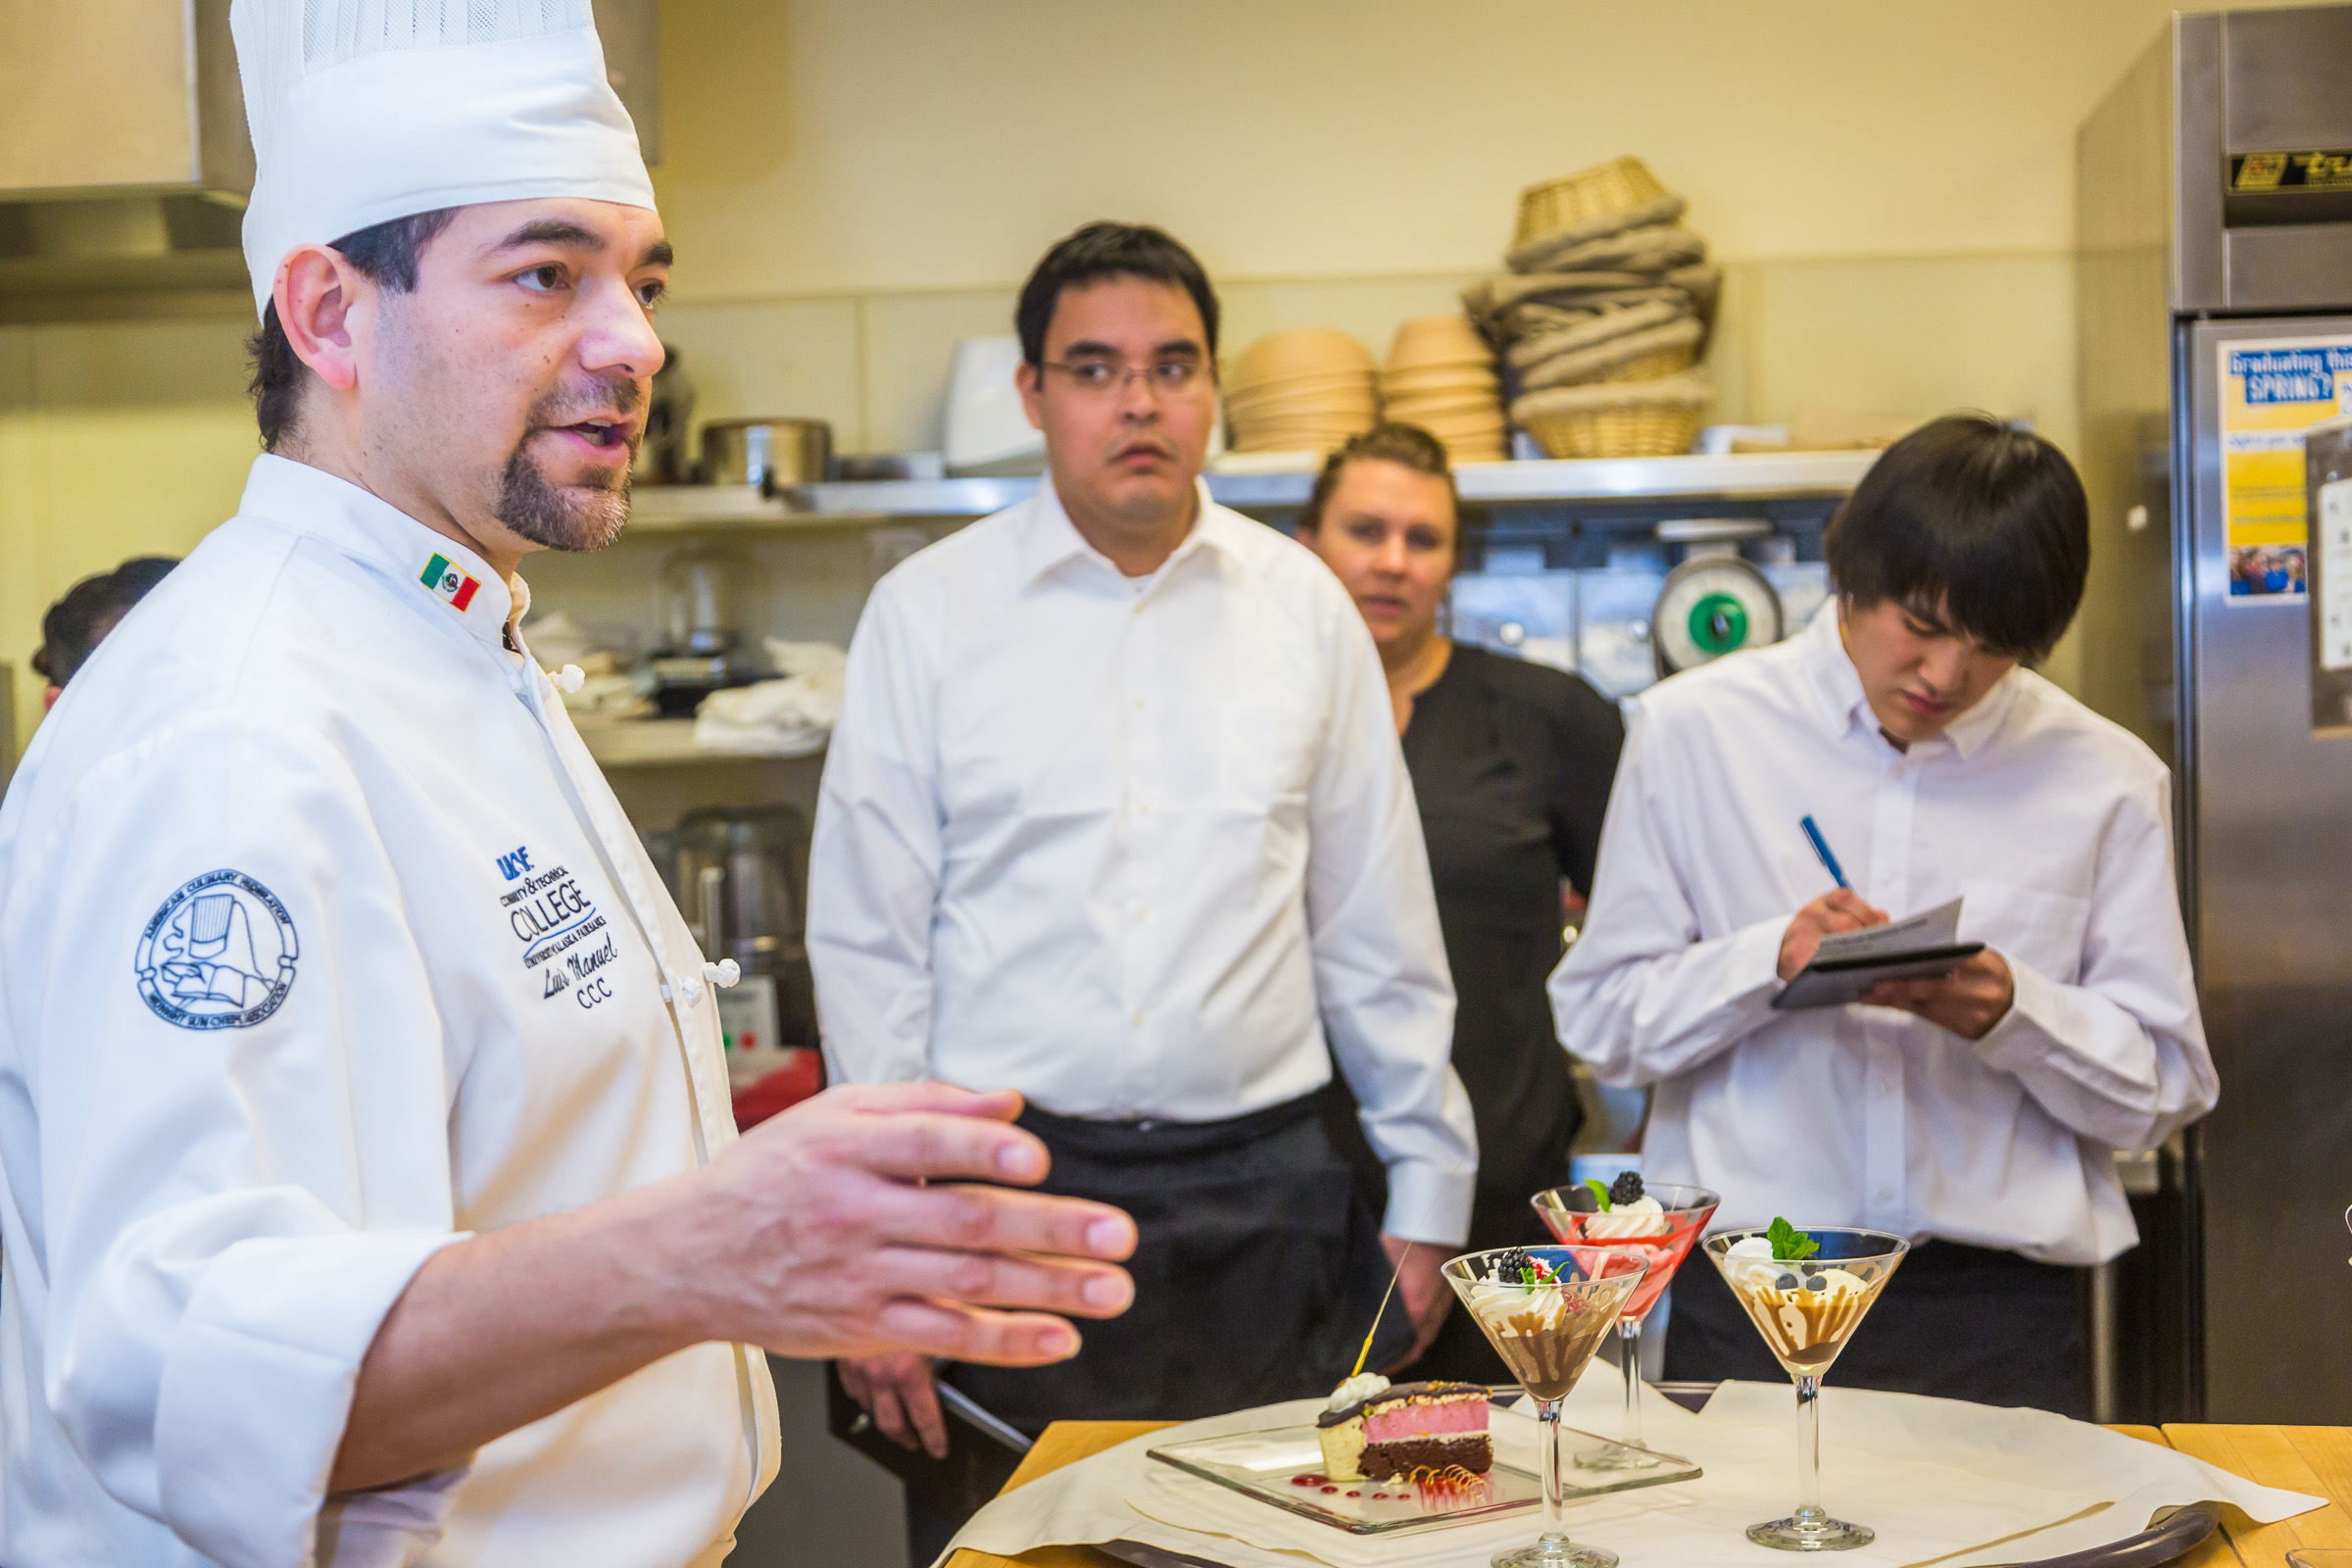 What is the curriculum for a culinary student?